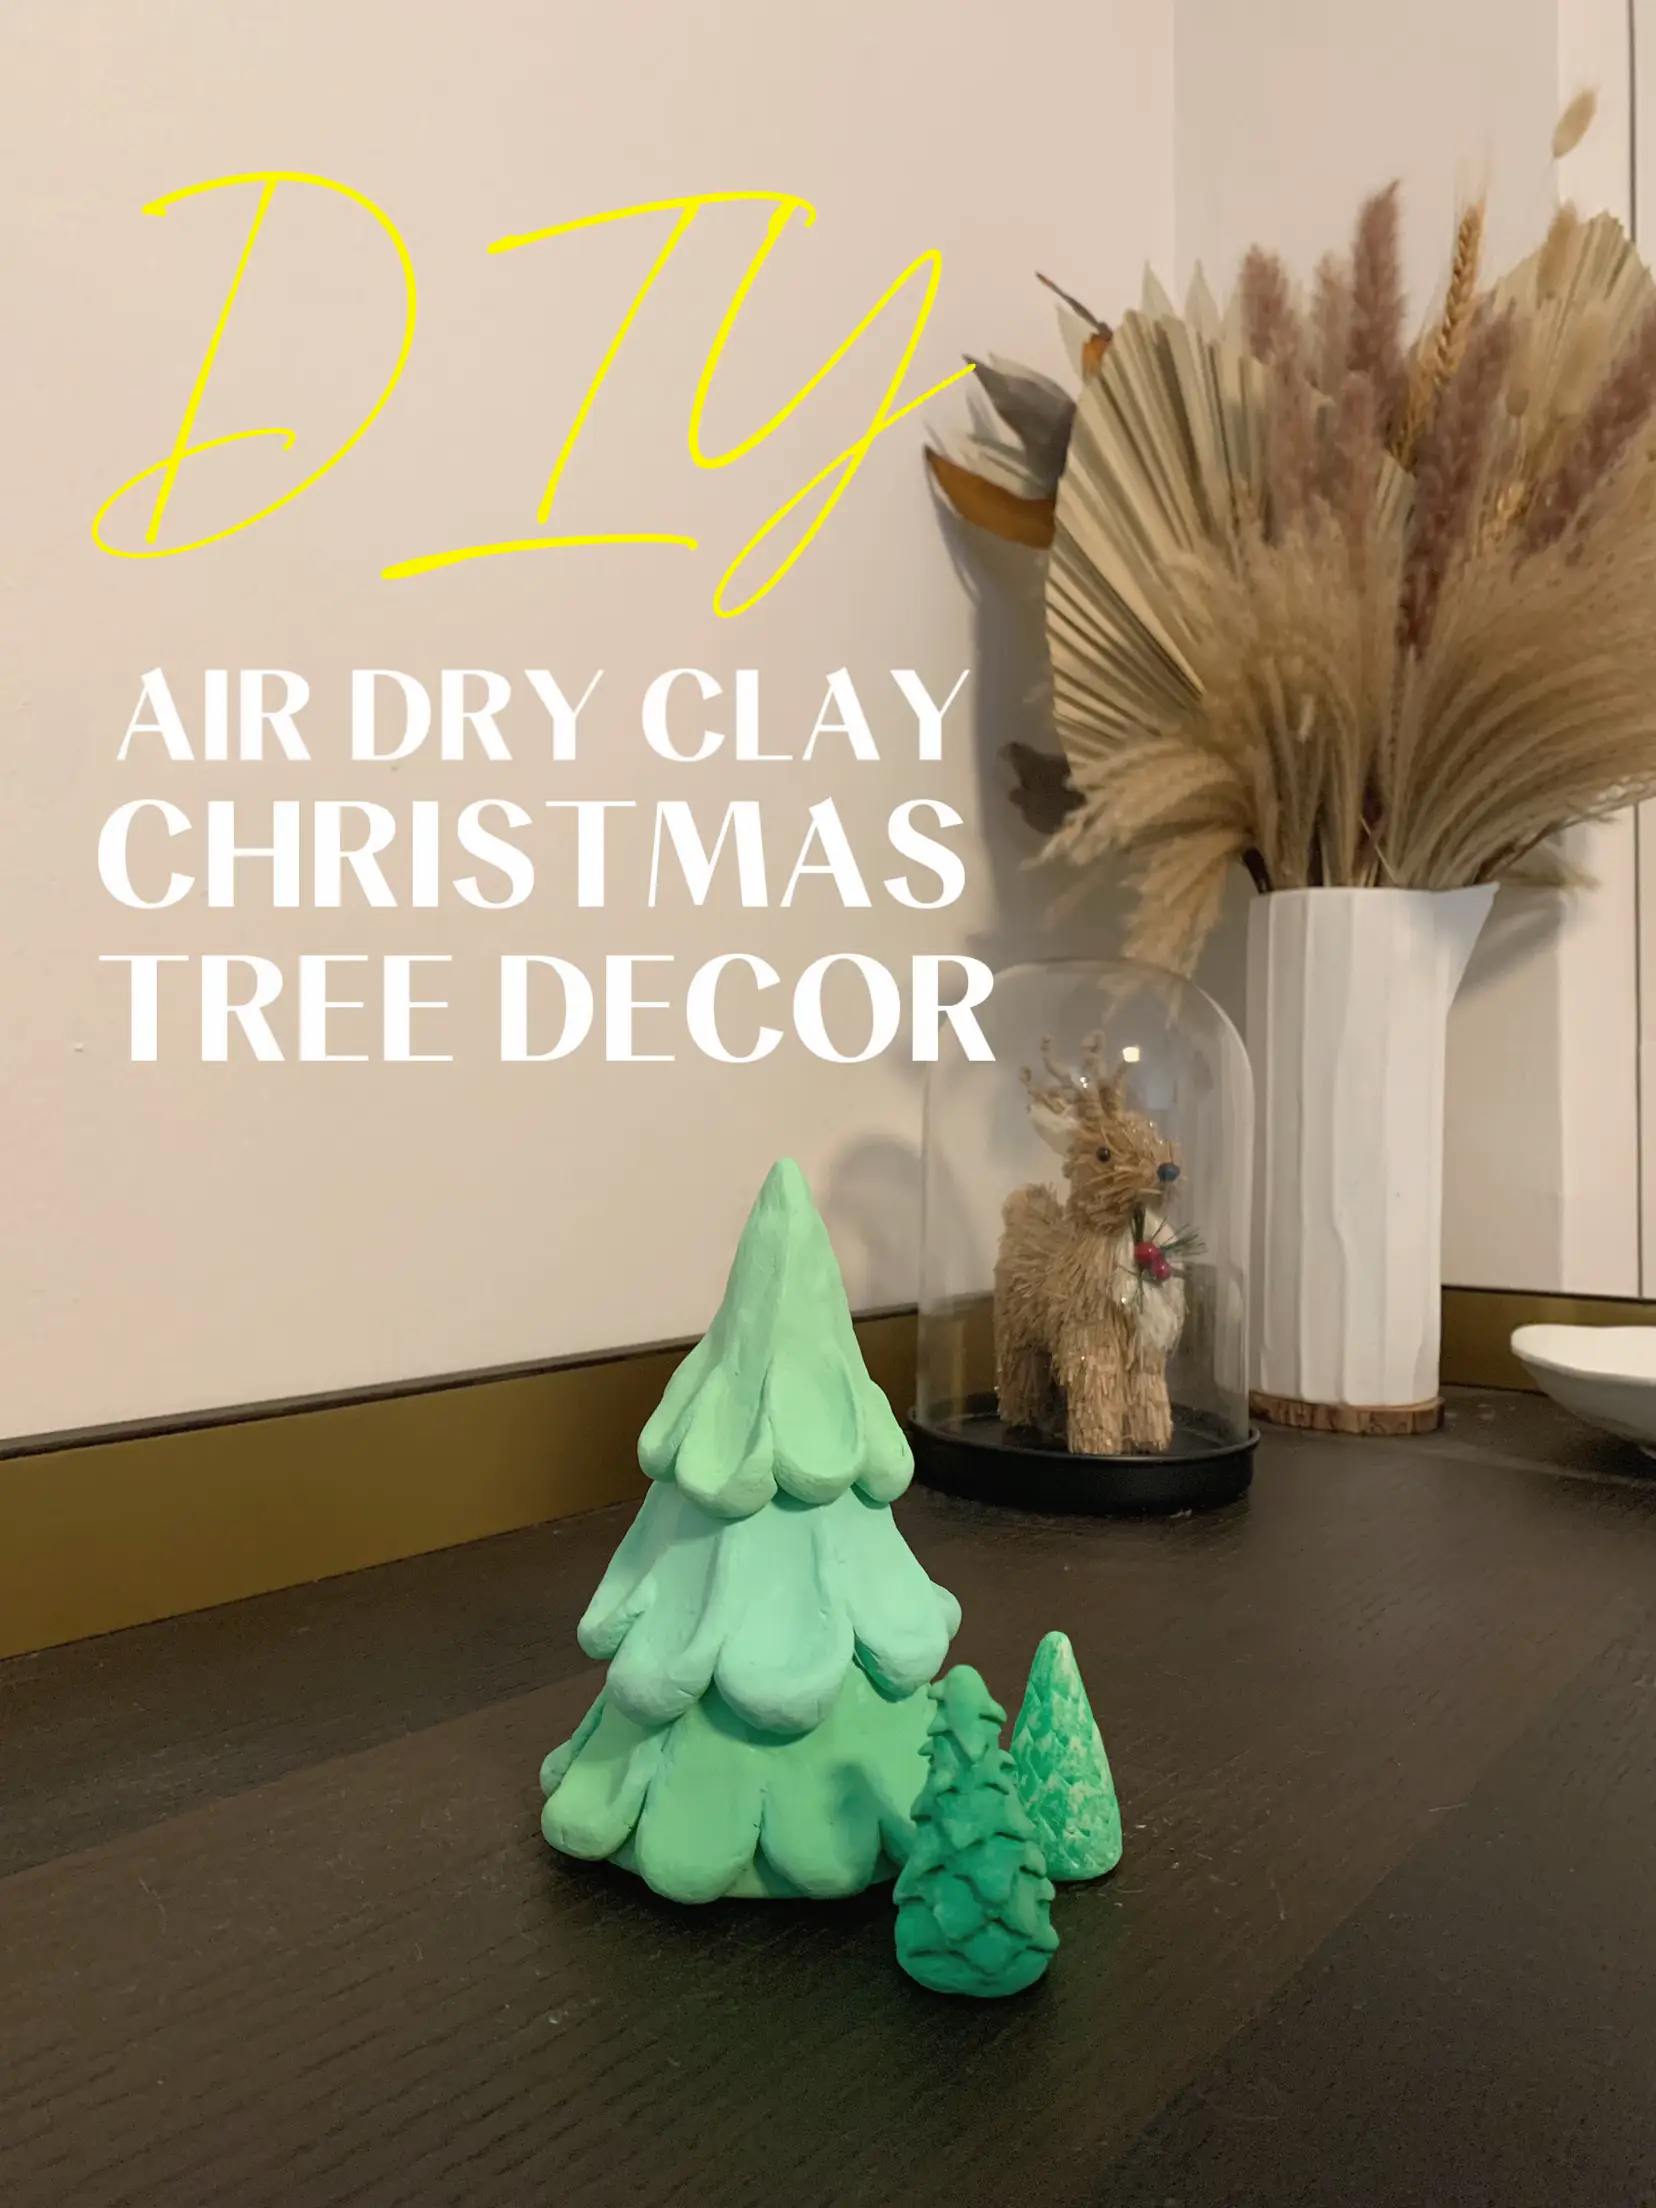 TOP 10 AIR DRY CLAY IDEAS  Minimal and Aesthetic Home Decor